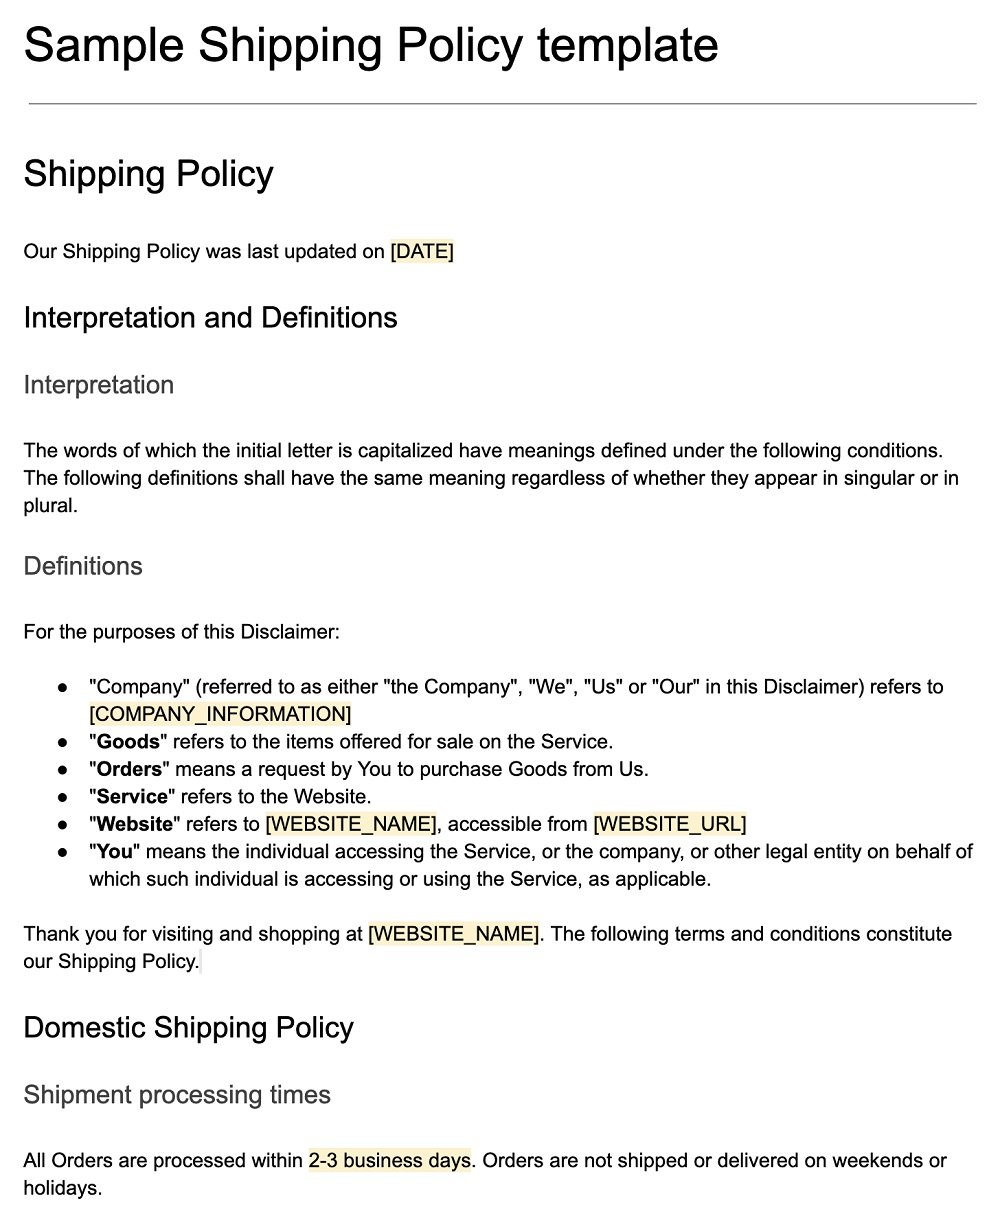 Screenshot of the Shipping Policy Template